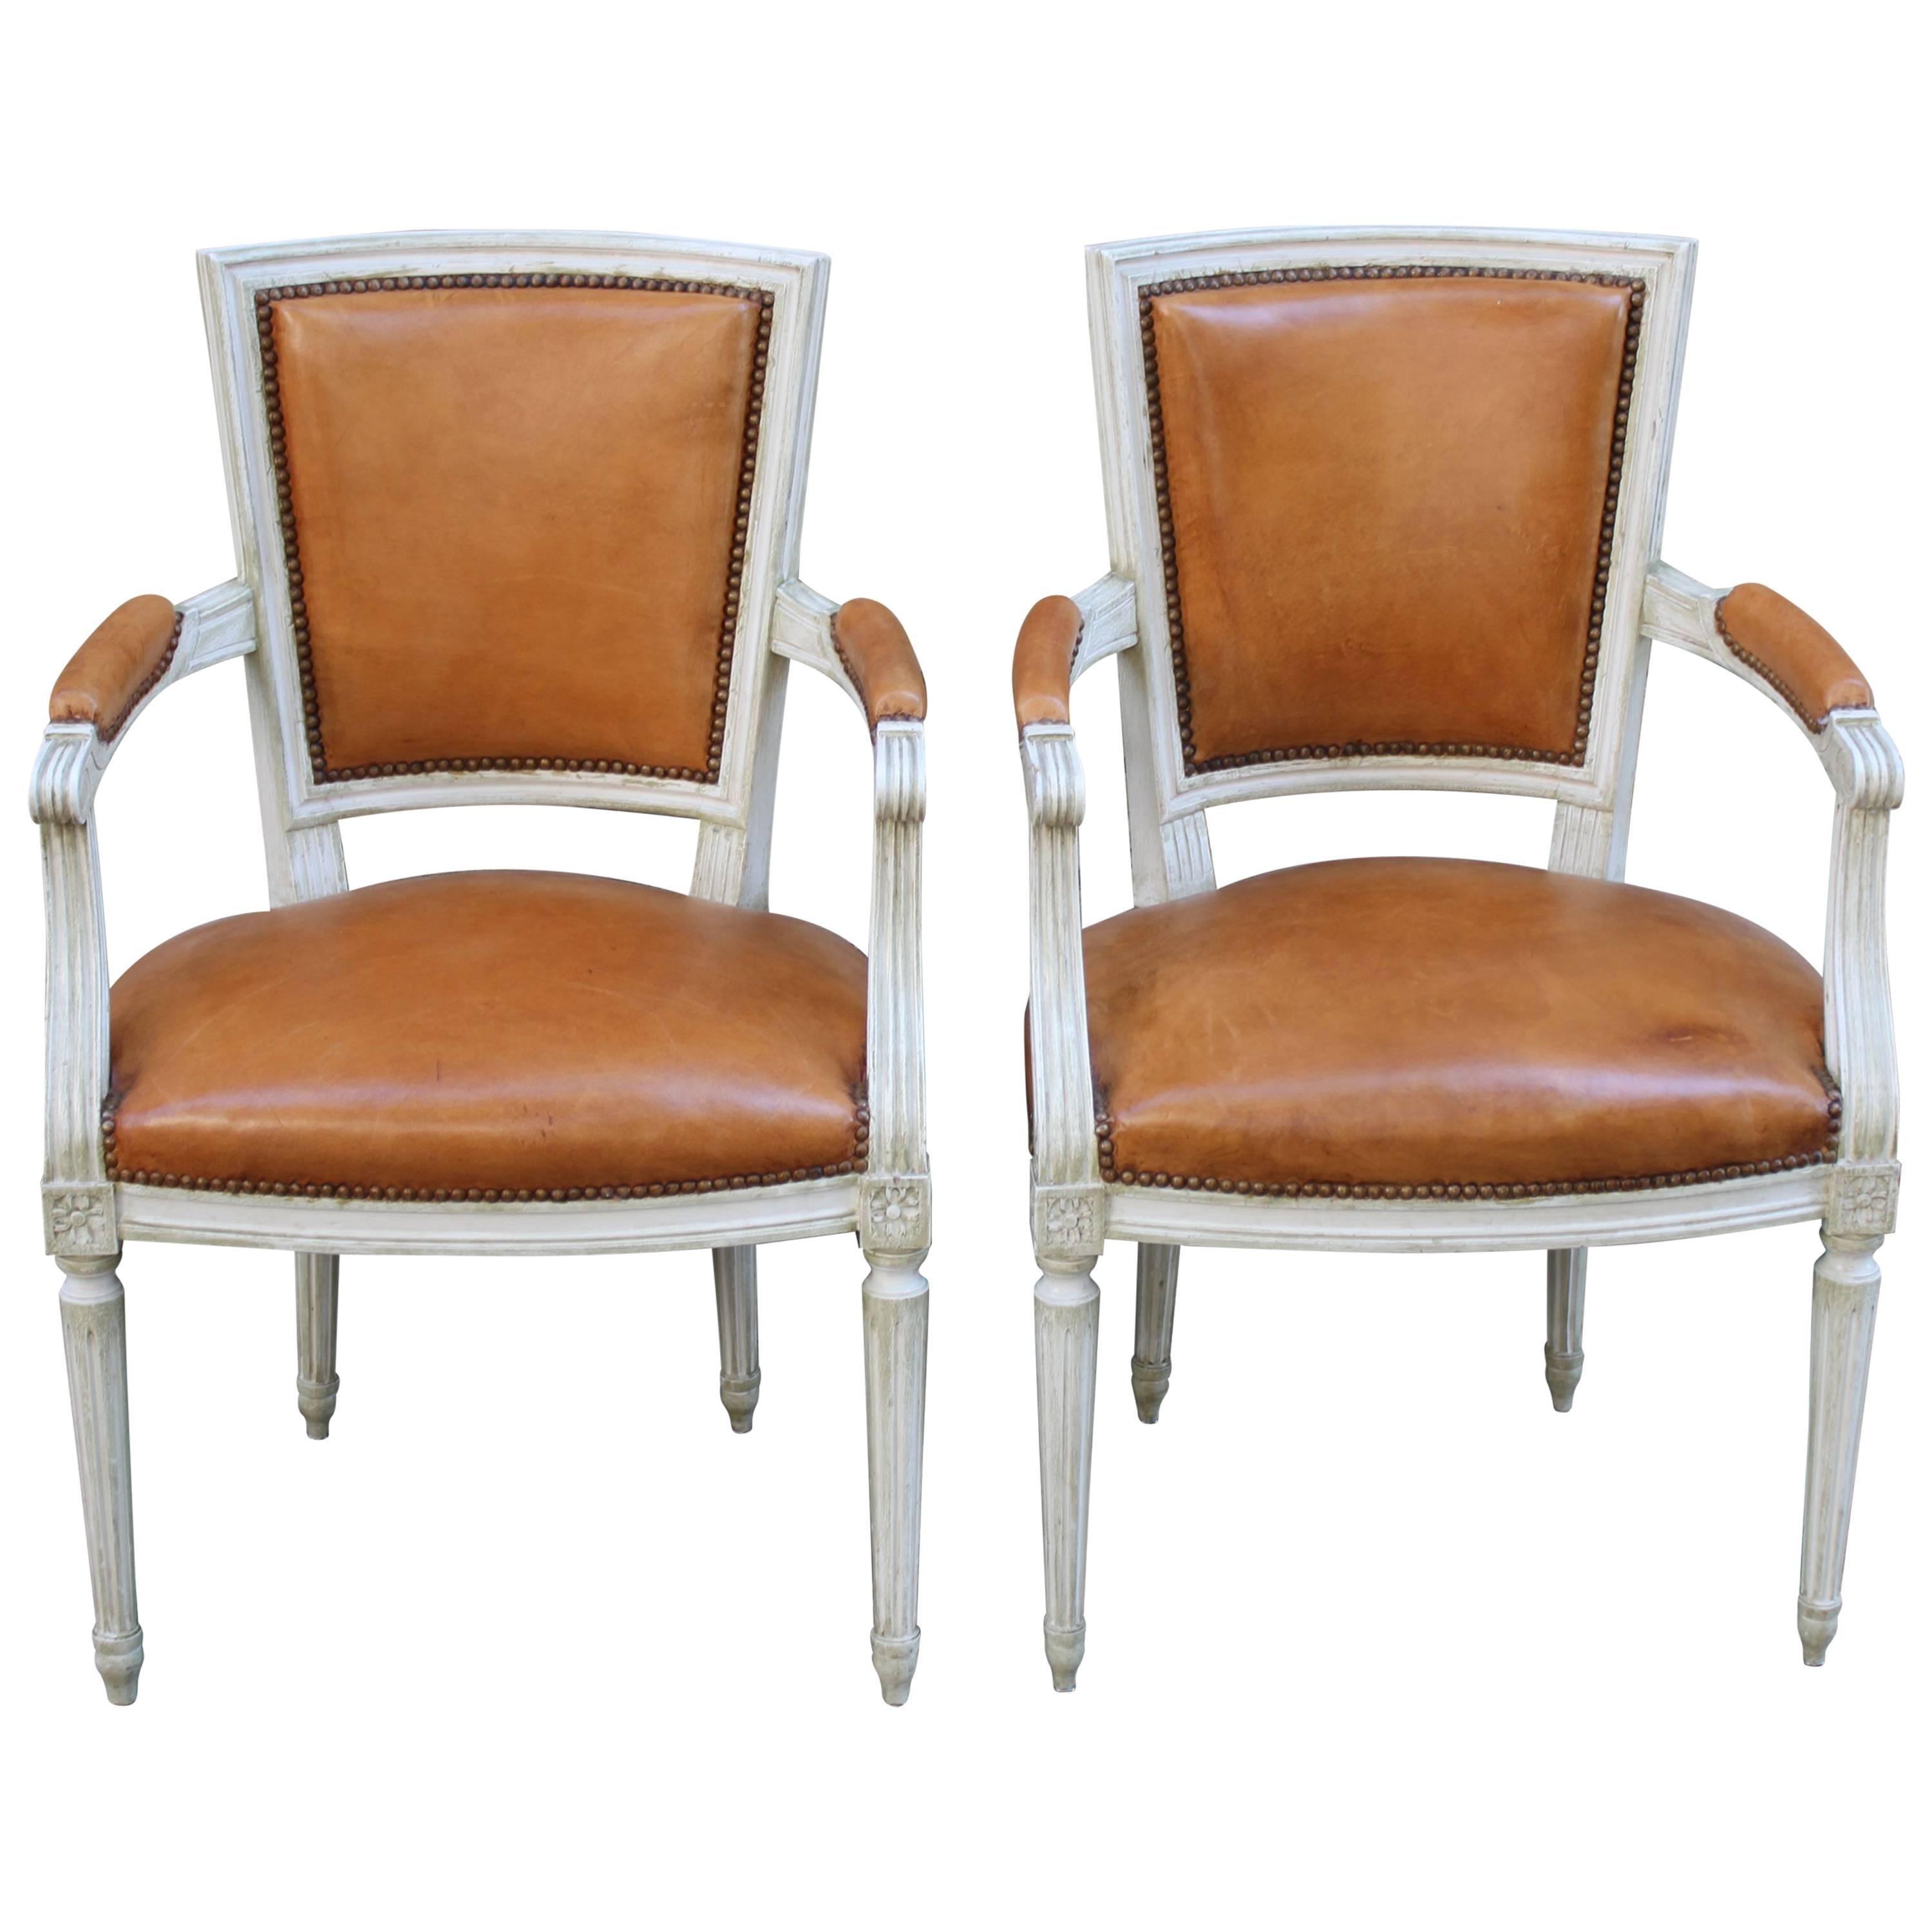 Pair of Armchairs or Fauteuils with Leather Upholstery in Louis XVI Style For Sale